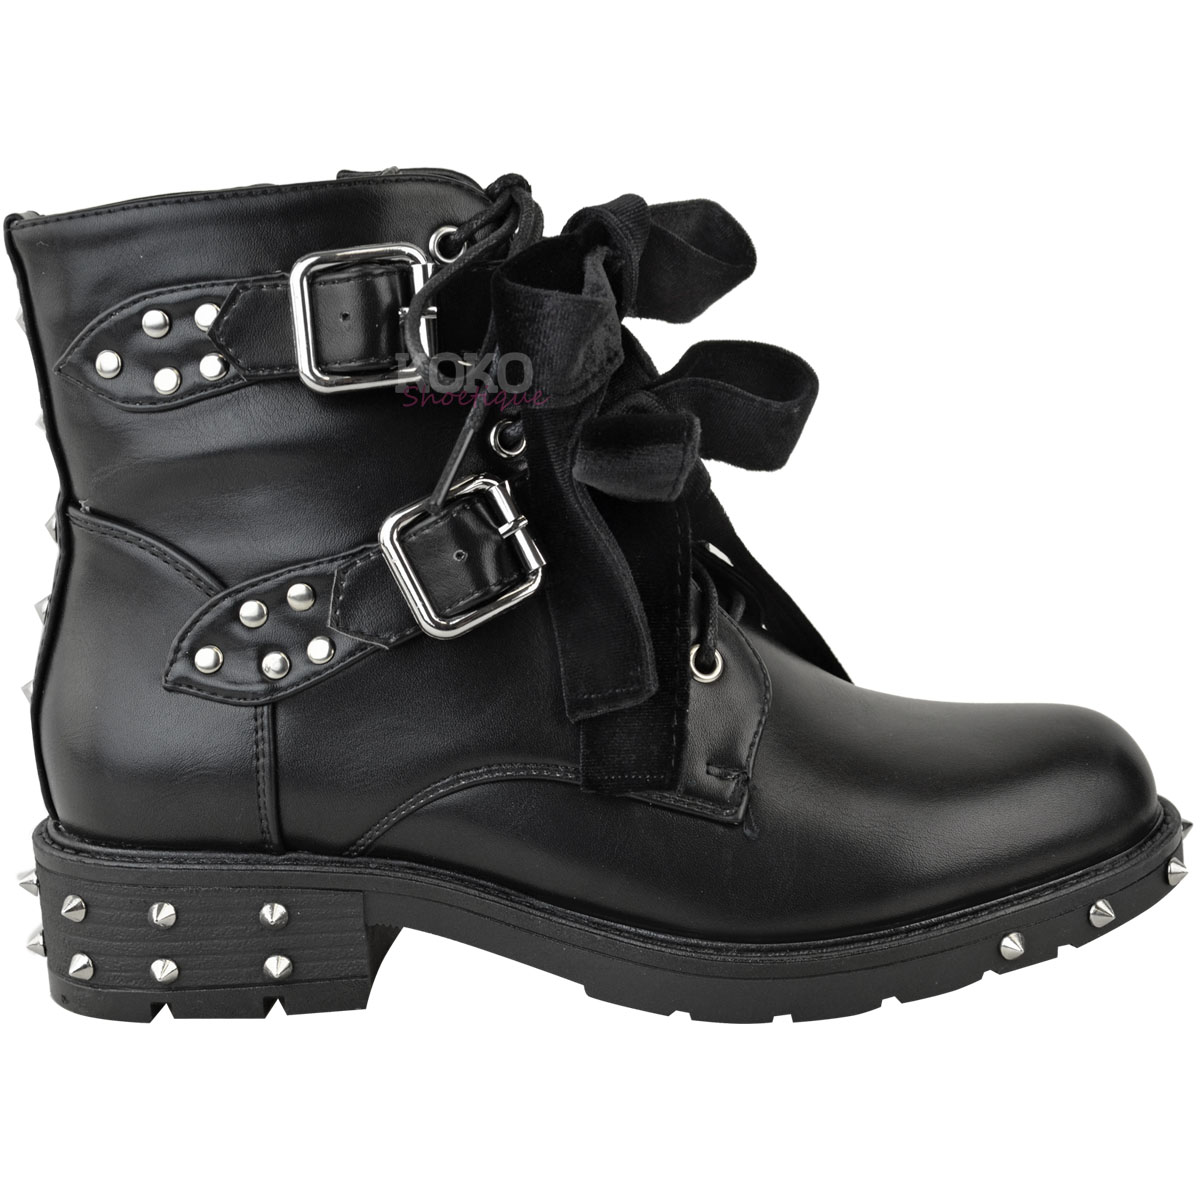 New Womens Ladies Studded Lace Up Ankle Boots Buckle Biker Goth Flat ...